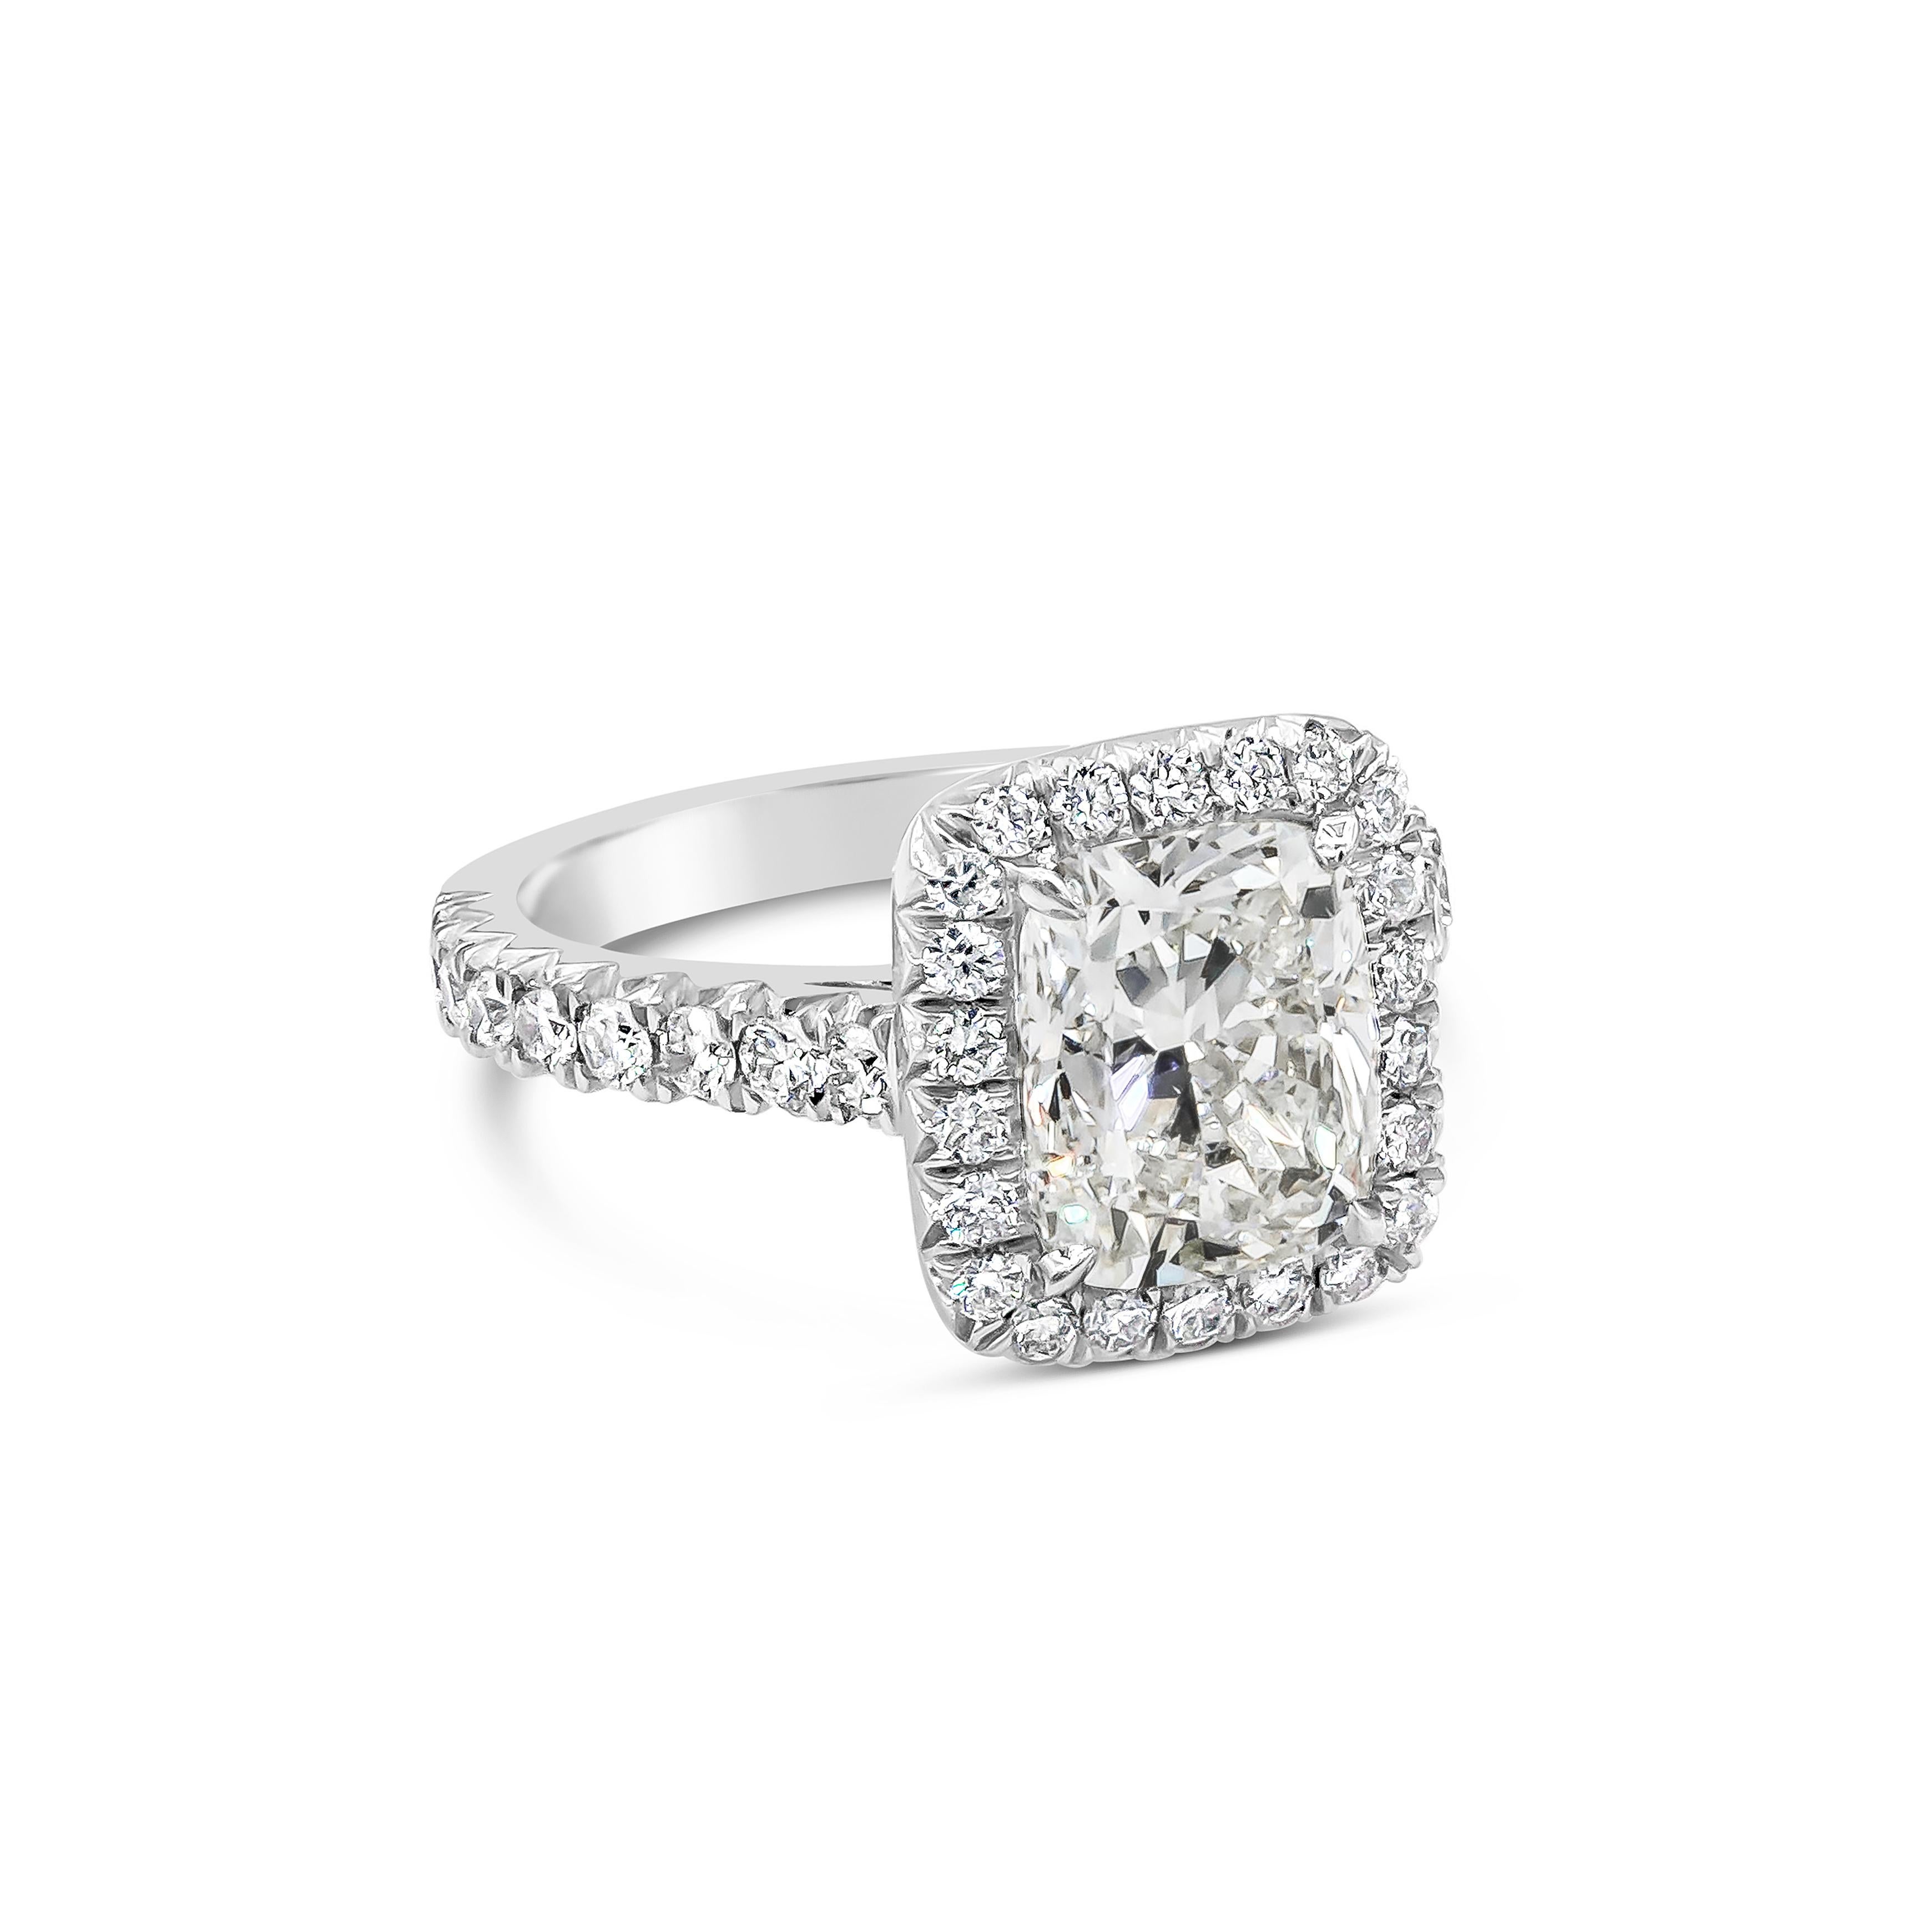 Features a 3.02 carats cushion cut diamond certified by GIA as J color and VS2 in clarity, surrounded by a single row of round brilliant diamonds in halo pave setting. Set in a platinum band with accented round diamonds in half-eternity setting.